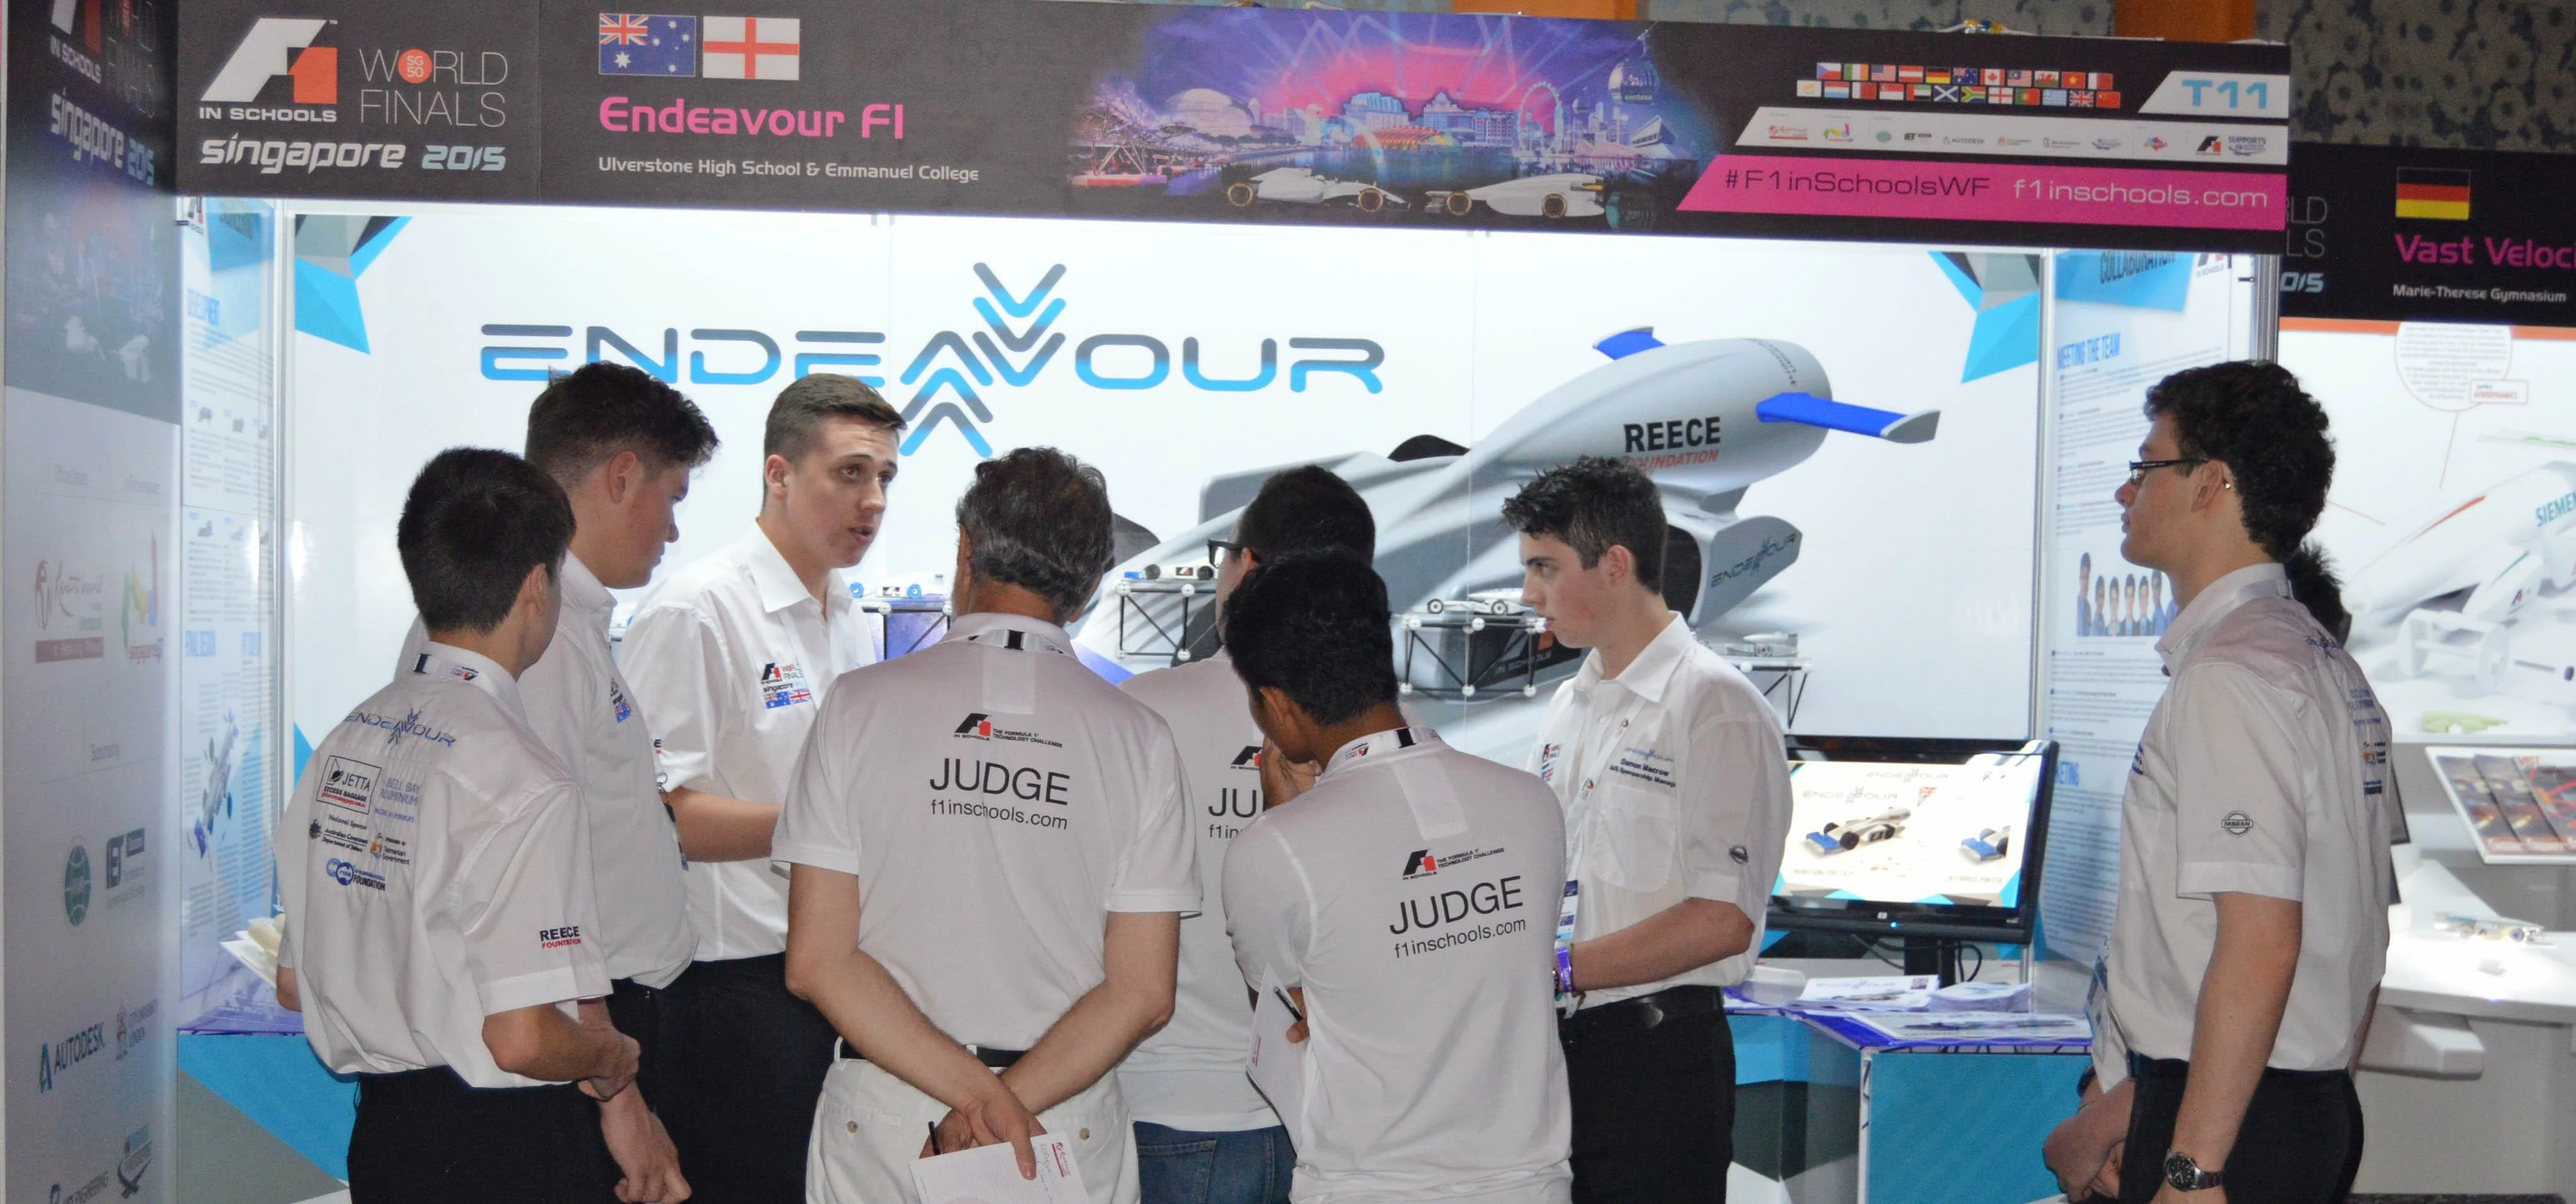 James Rodger (third from left) explains the Emmanuel College’s team concept to judges at the F1 in S